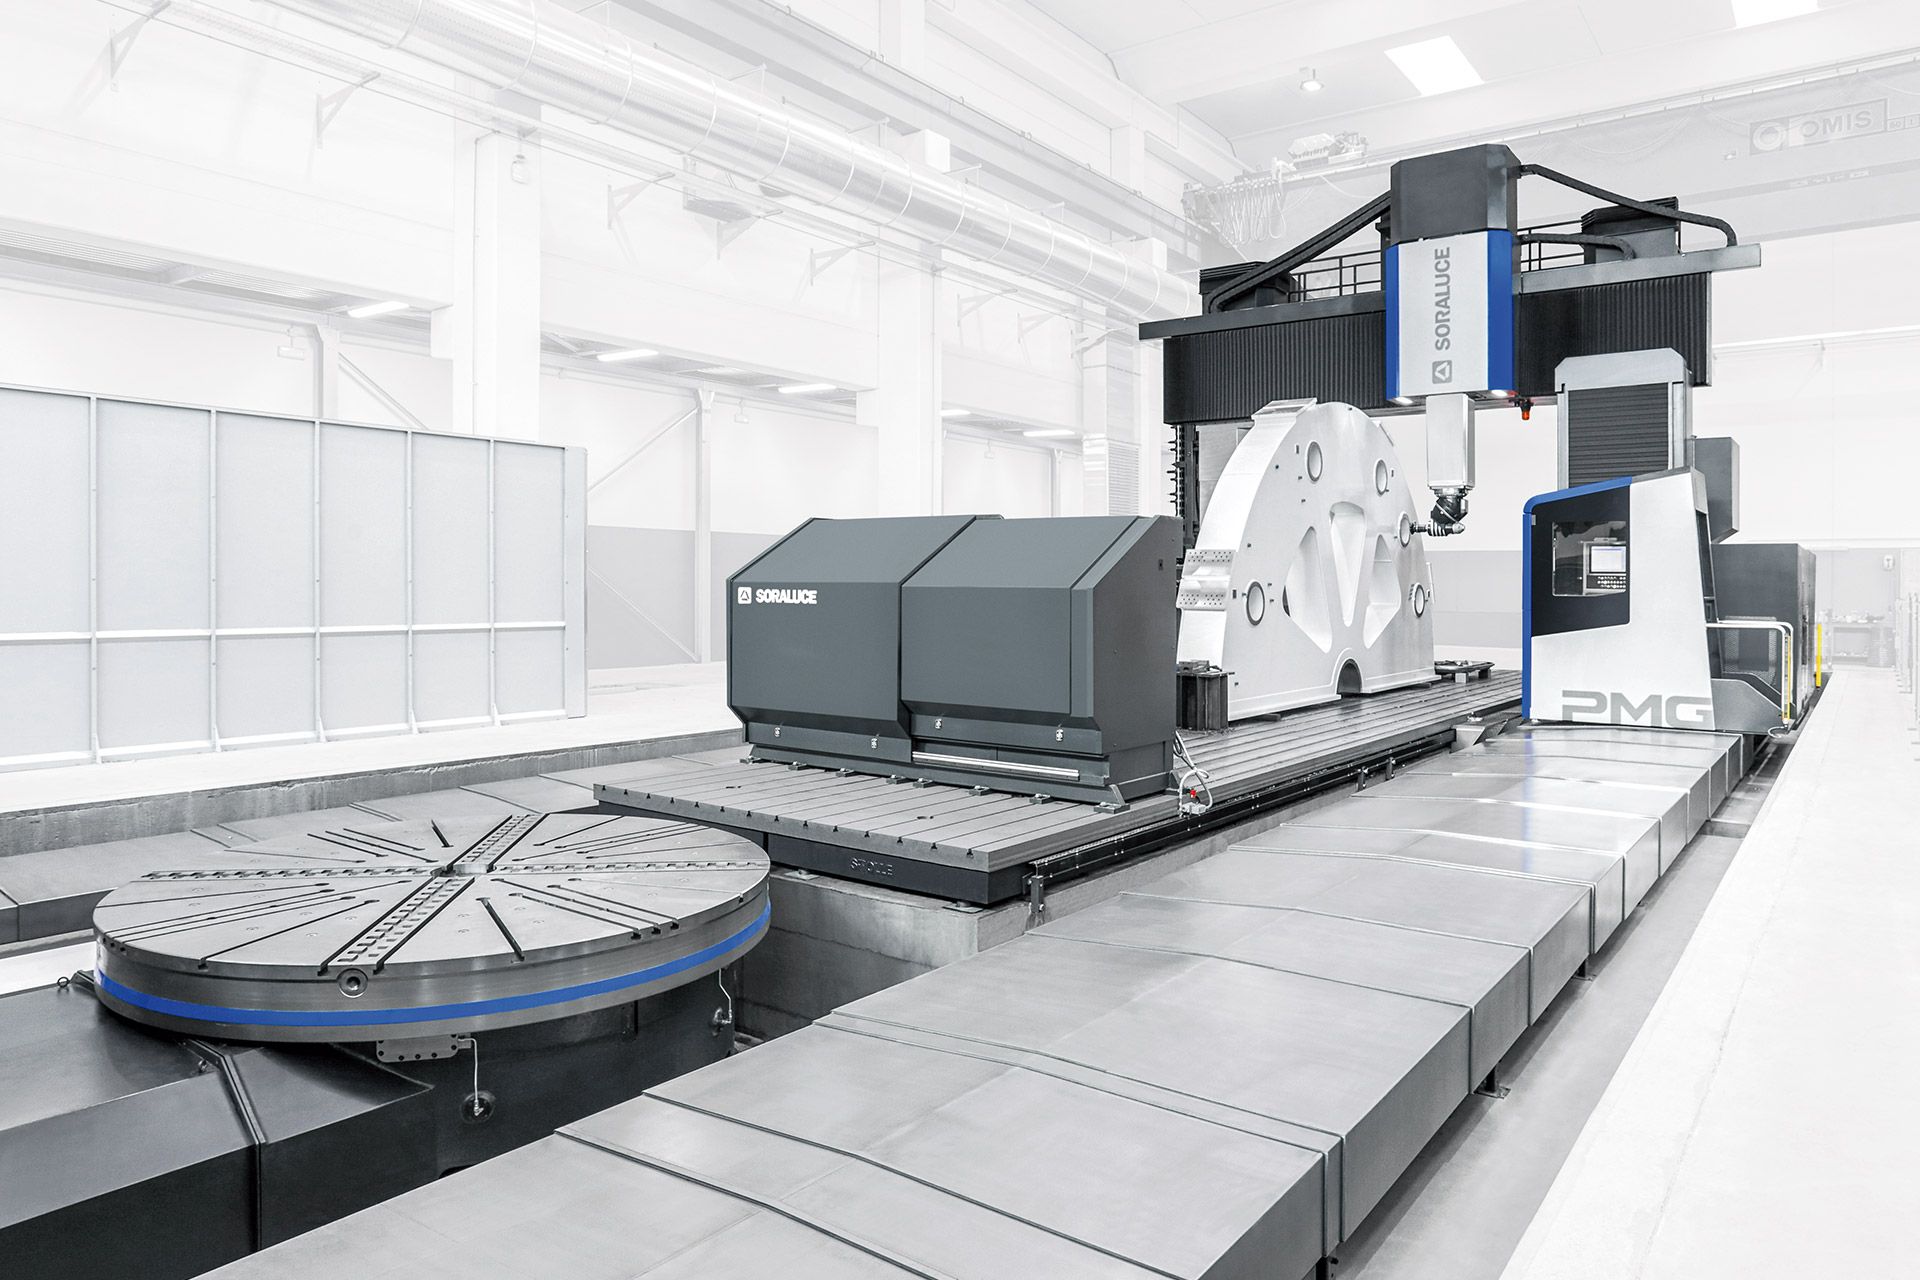 Soraluce offers an extensive portfolio encompassing milling machines, boring machines, vertical lathes, multifunctional solutions, and automated systems and production lines